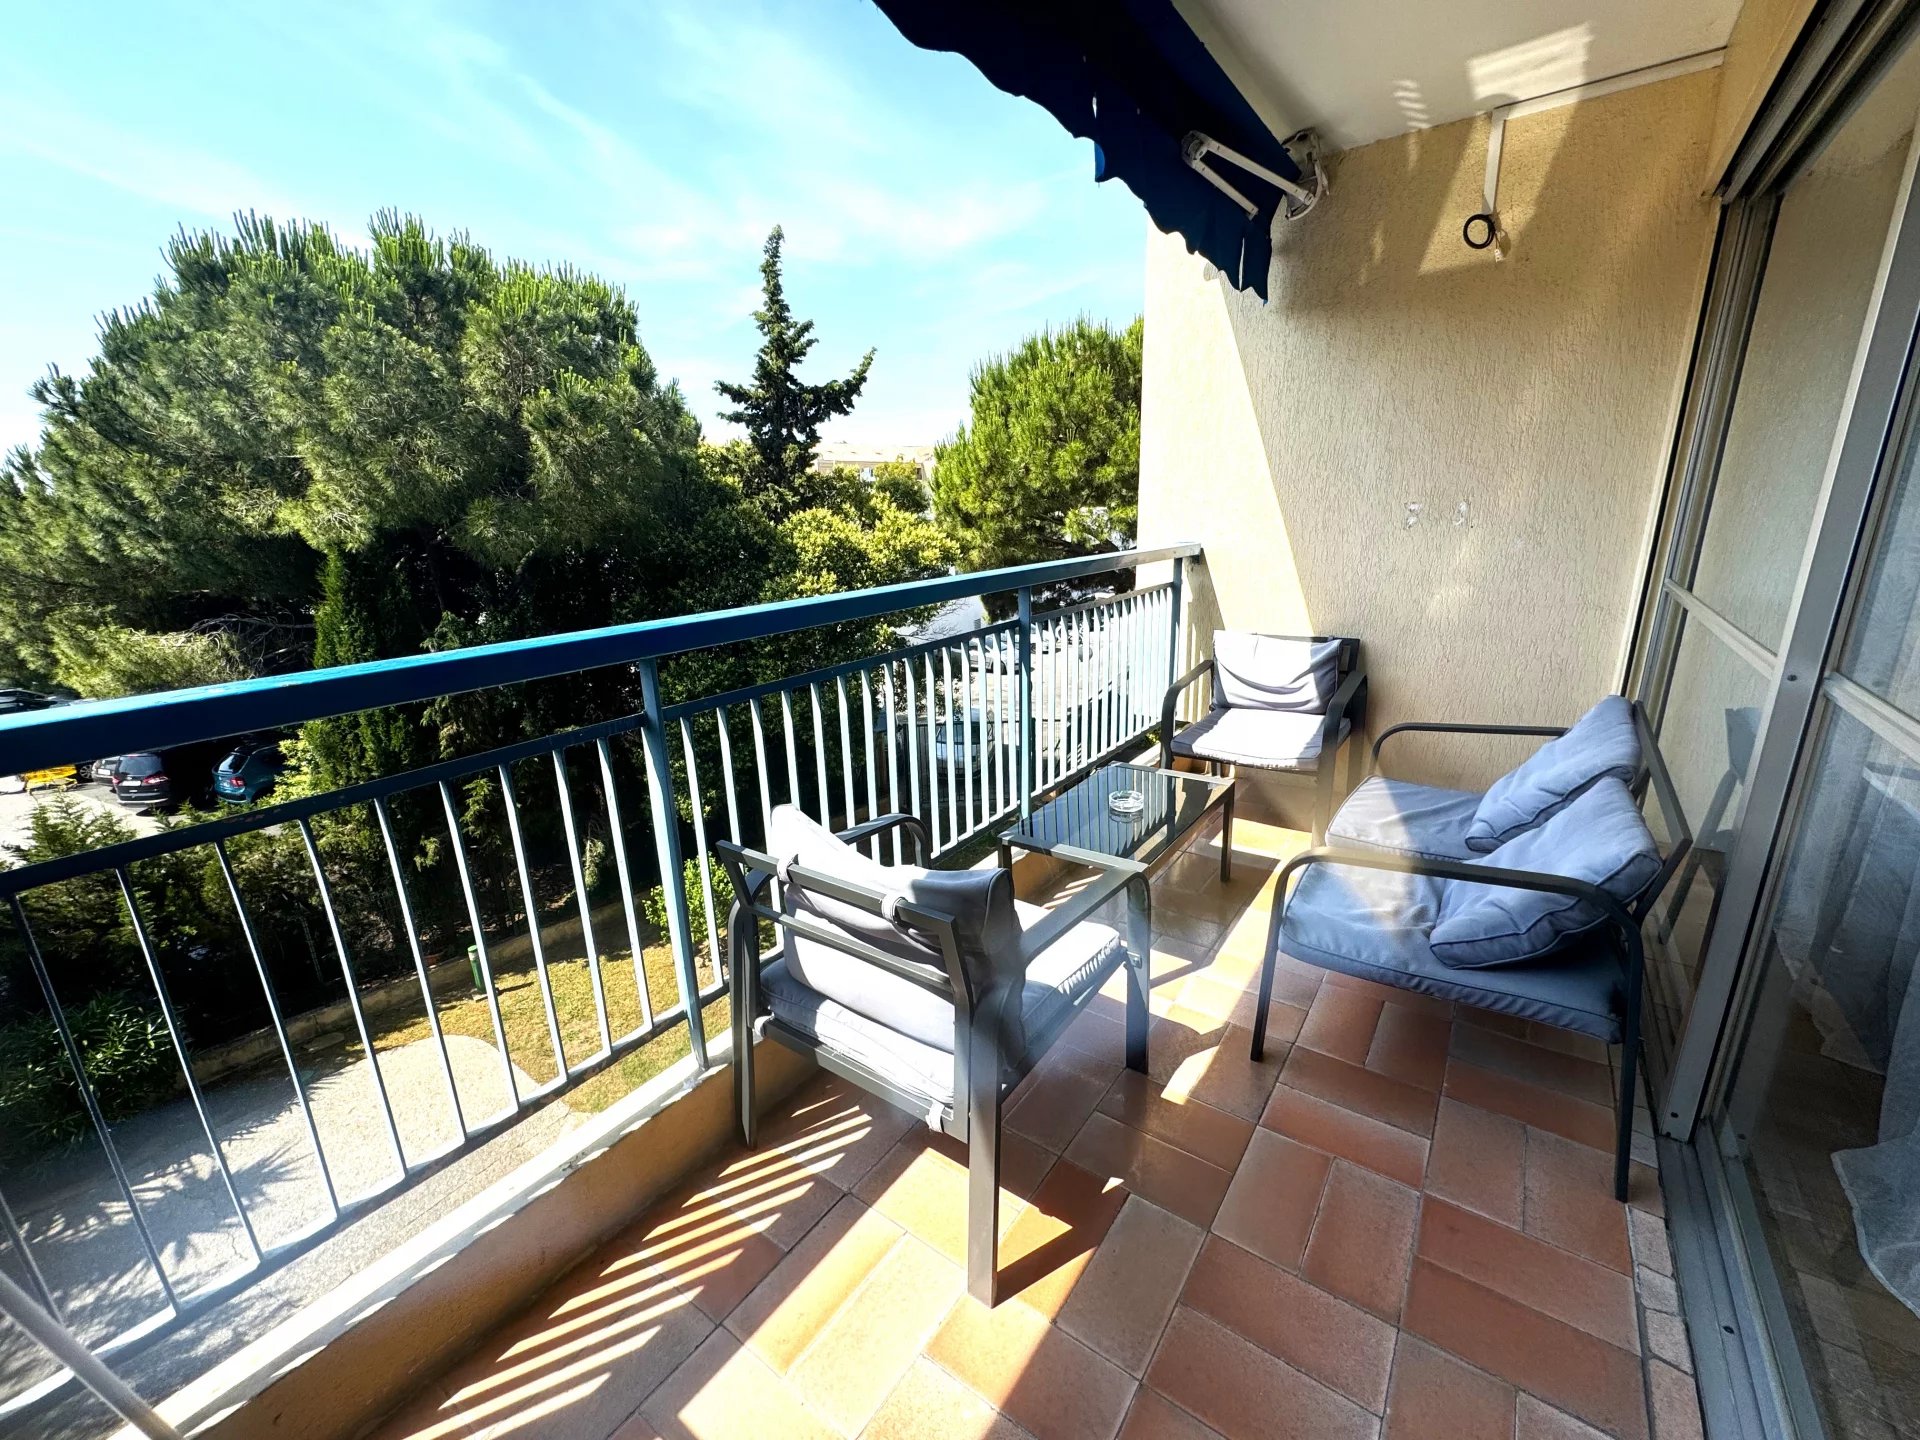  Cannes La Bocca 3 room apartment for sale beaches and shops on foot!